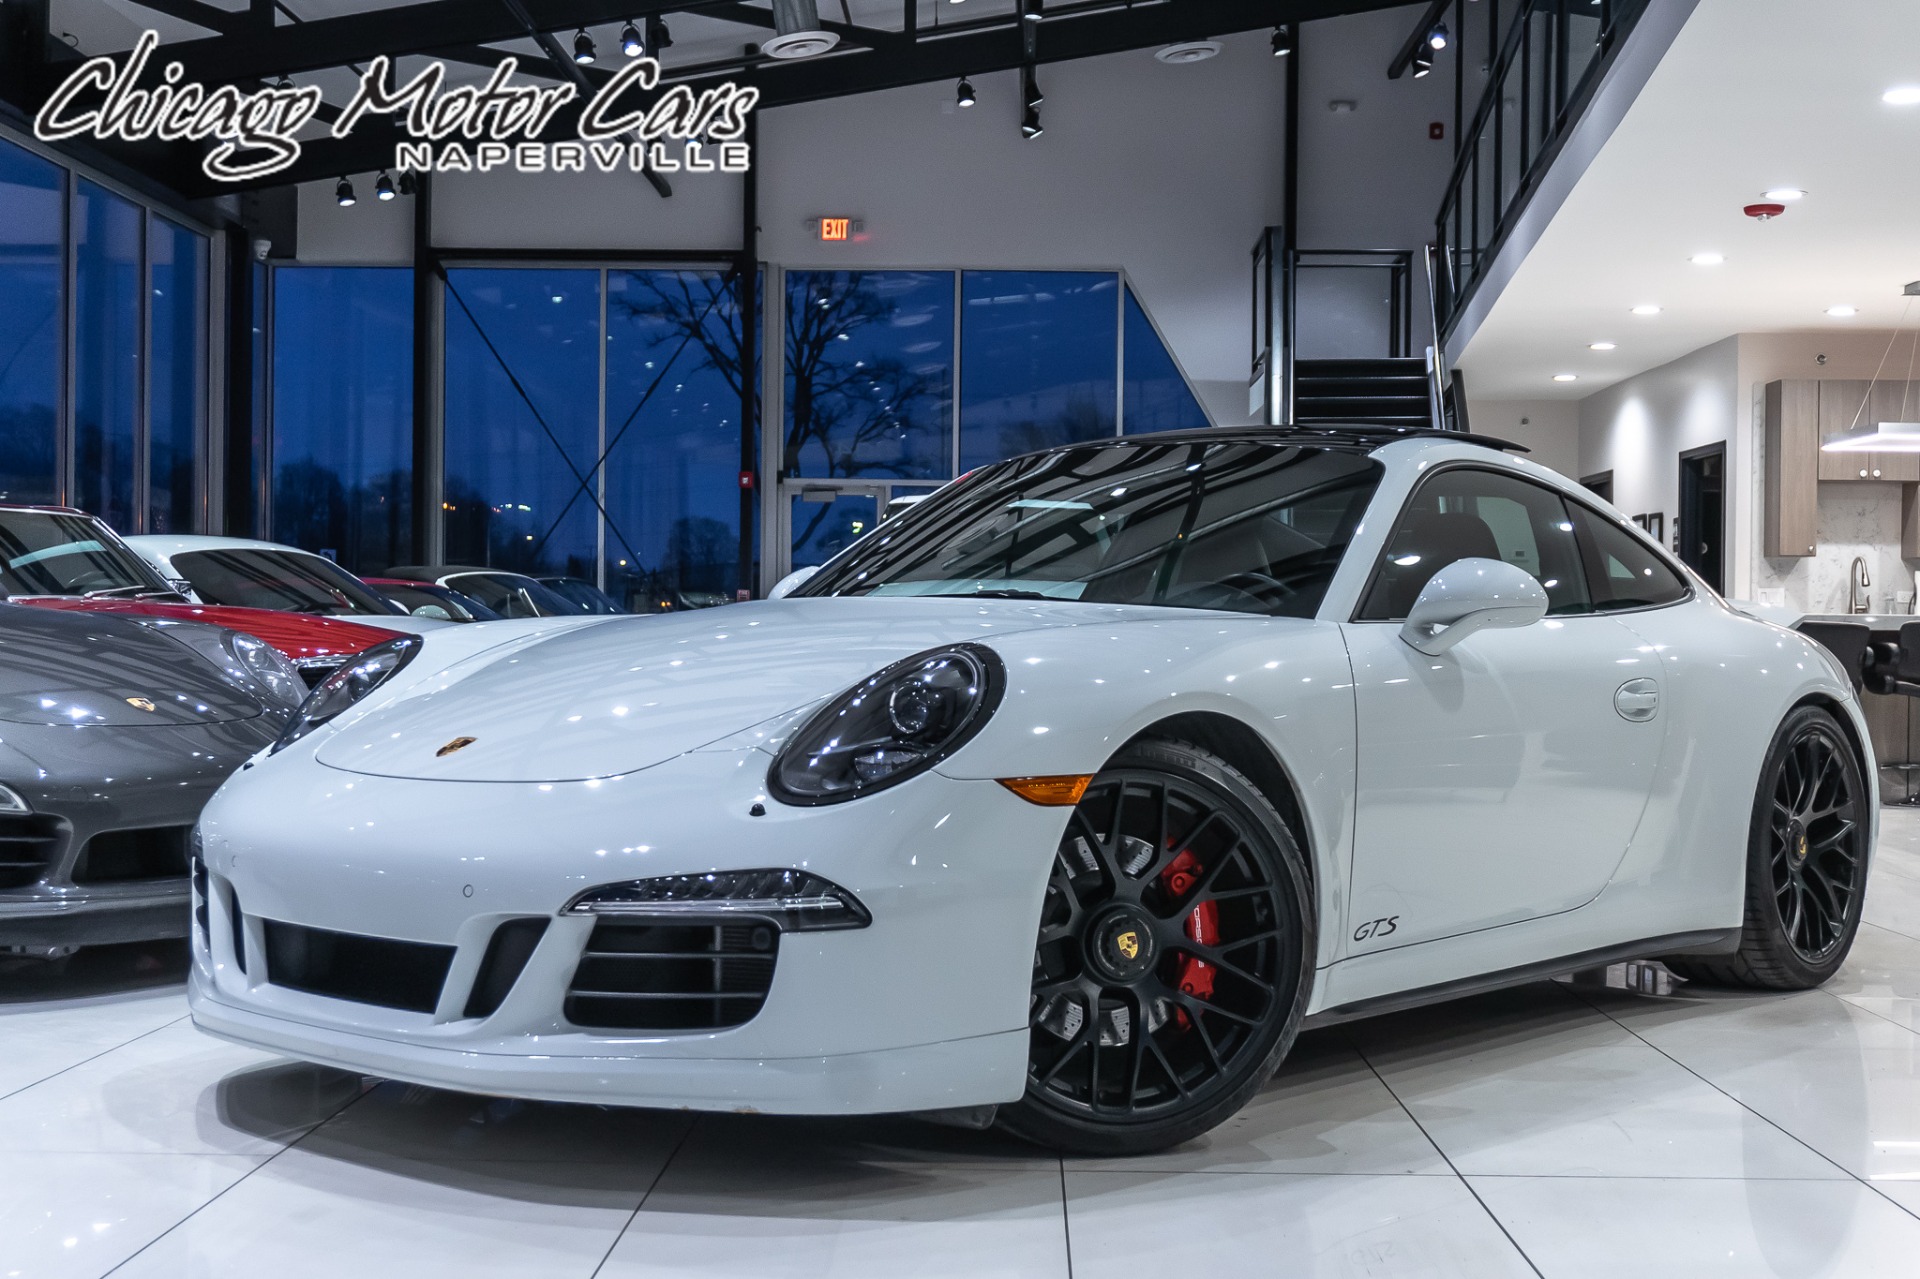 Used 2015 Porsche 911 Carrera GTS Coupe Original MSRP $139k+ GTS  Communication Pkg! BOSE Audio! For Sale (Special Pricing) | Chicago Motor  Cars Stock #16589D